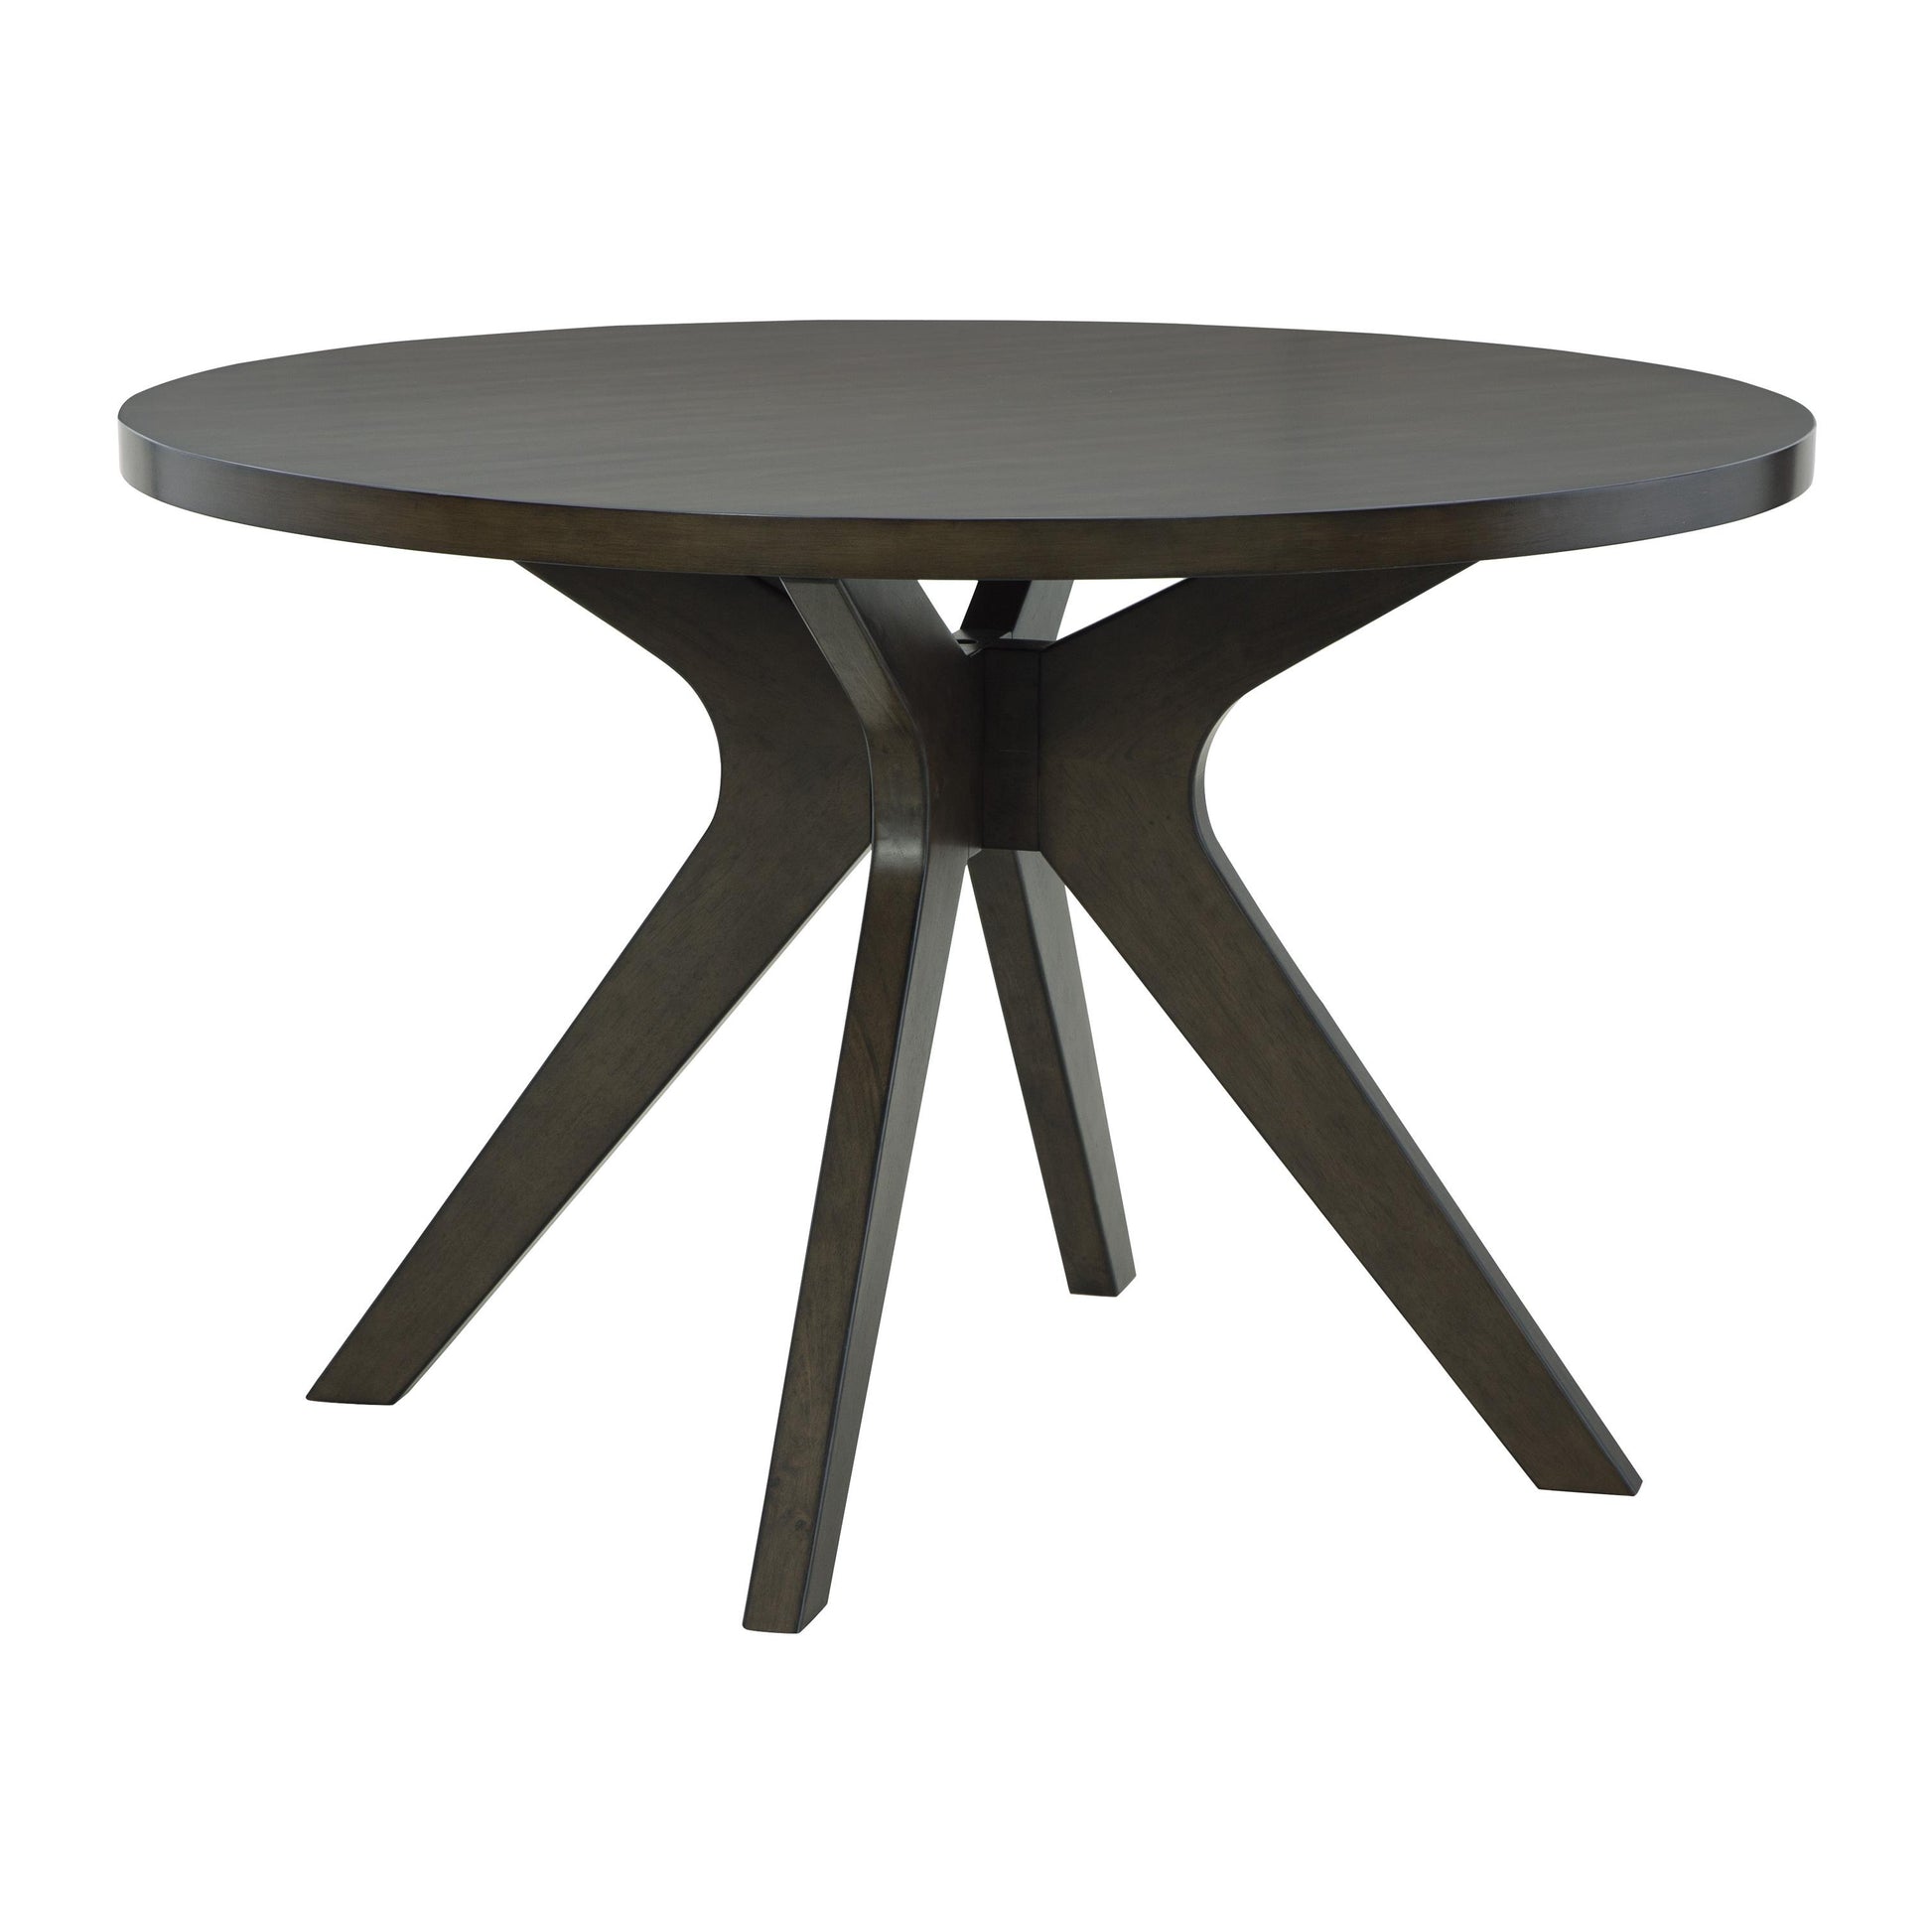 Signature Design by Ashley Round Wittland Dining Table with Pedestal Base D374-15